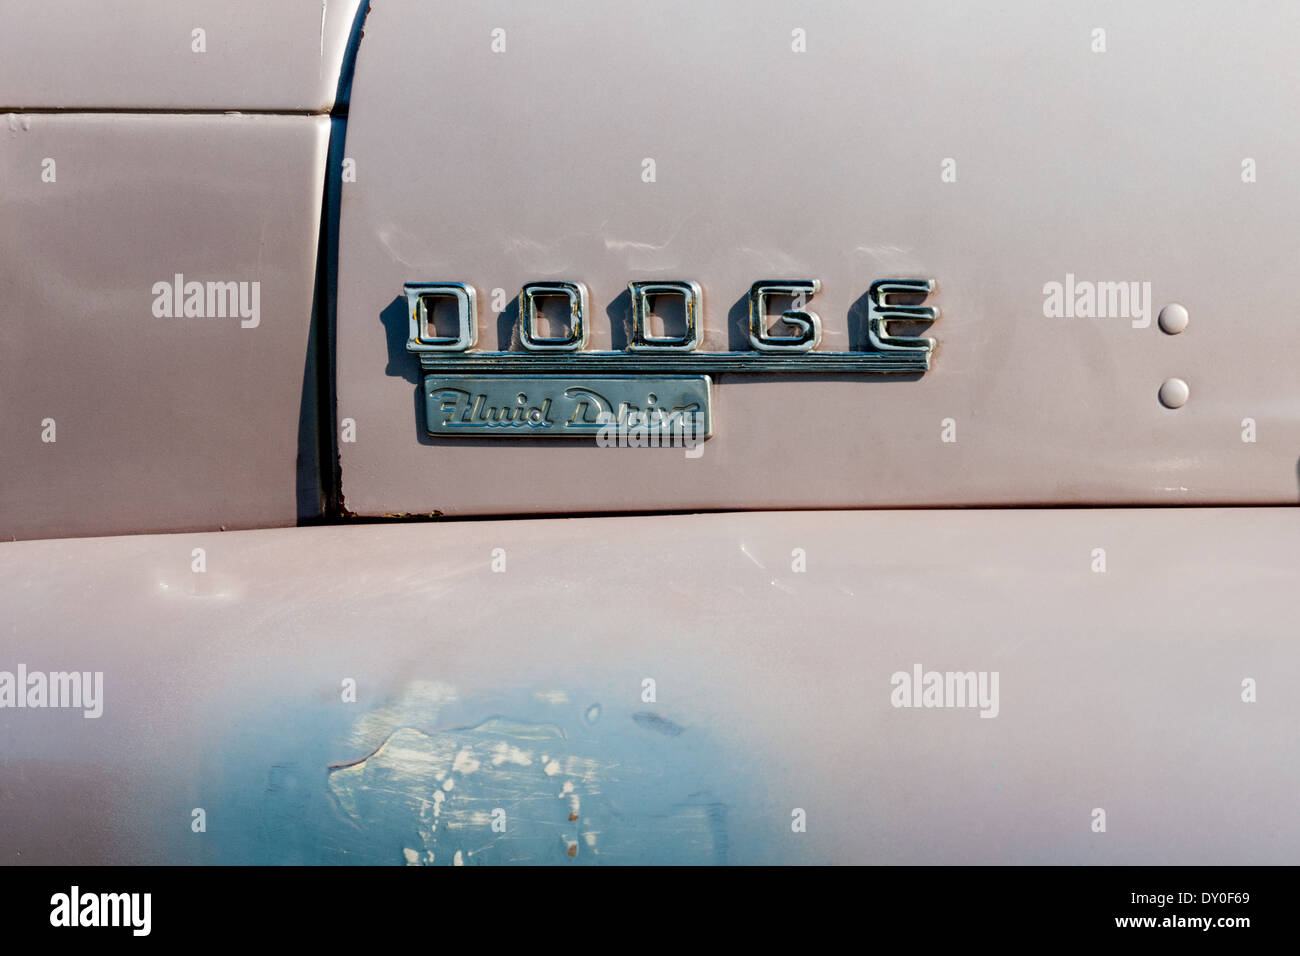 Dodge Pick up truck detail. Stock Photo